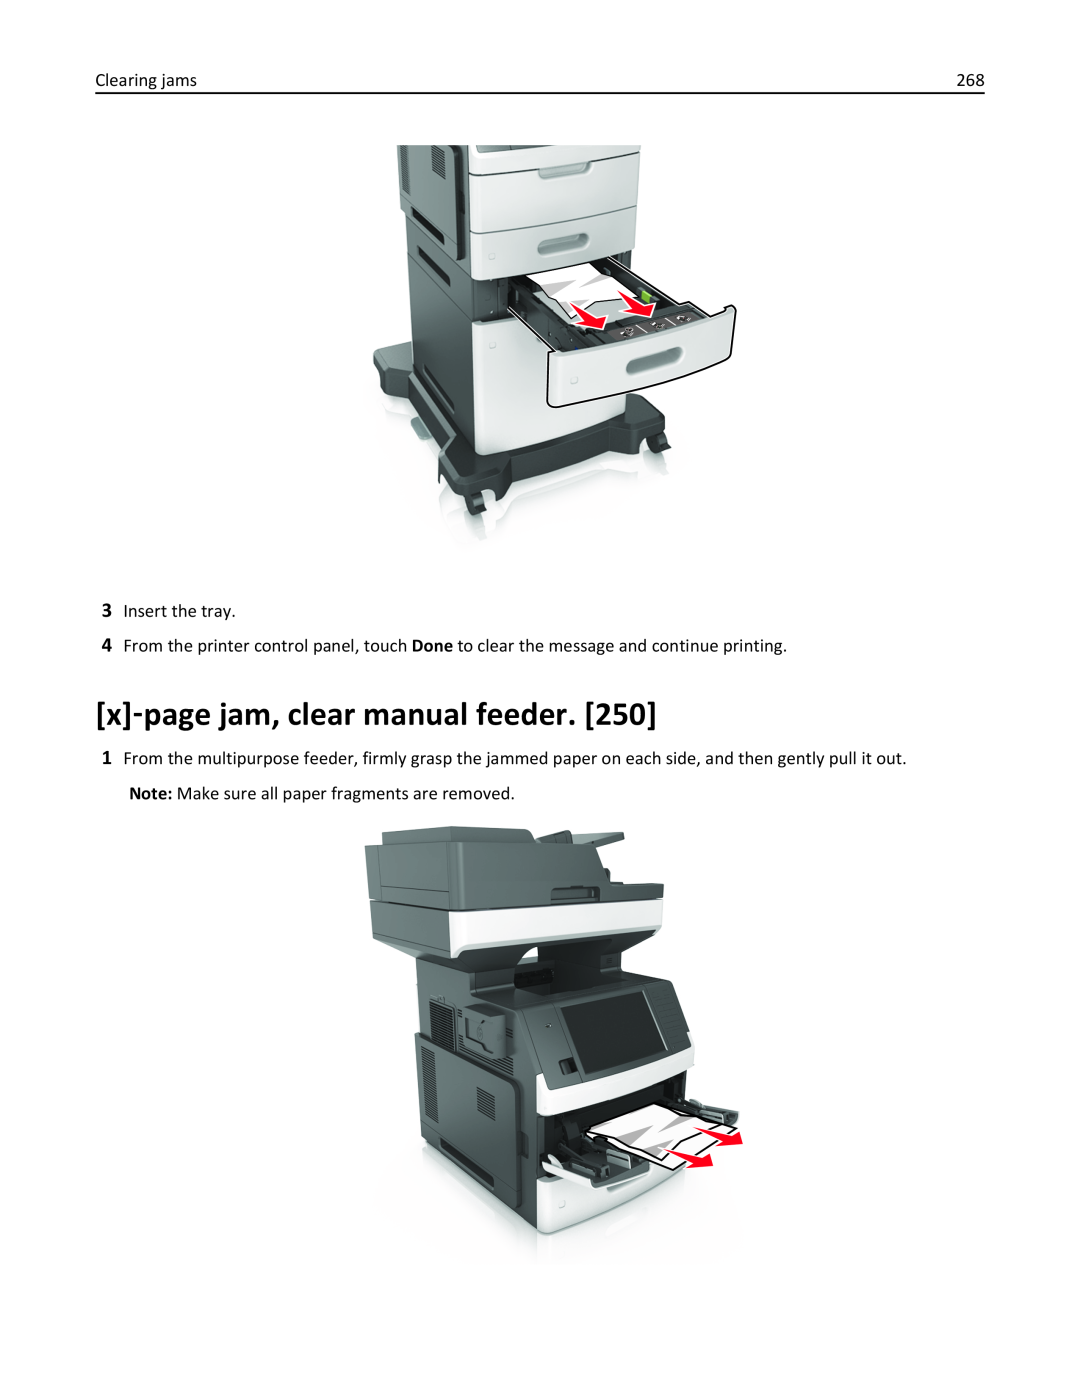 Lexmark 237, MX710DHE, 24T7310, 037 x‑page jam, clear manual feeder, Clearing jams, Insert the tray 